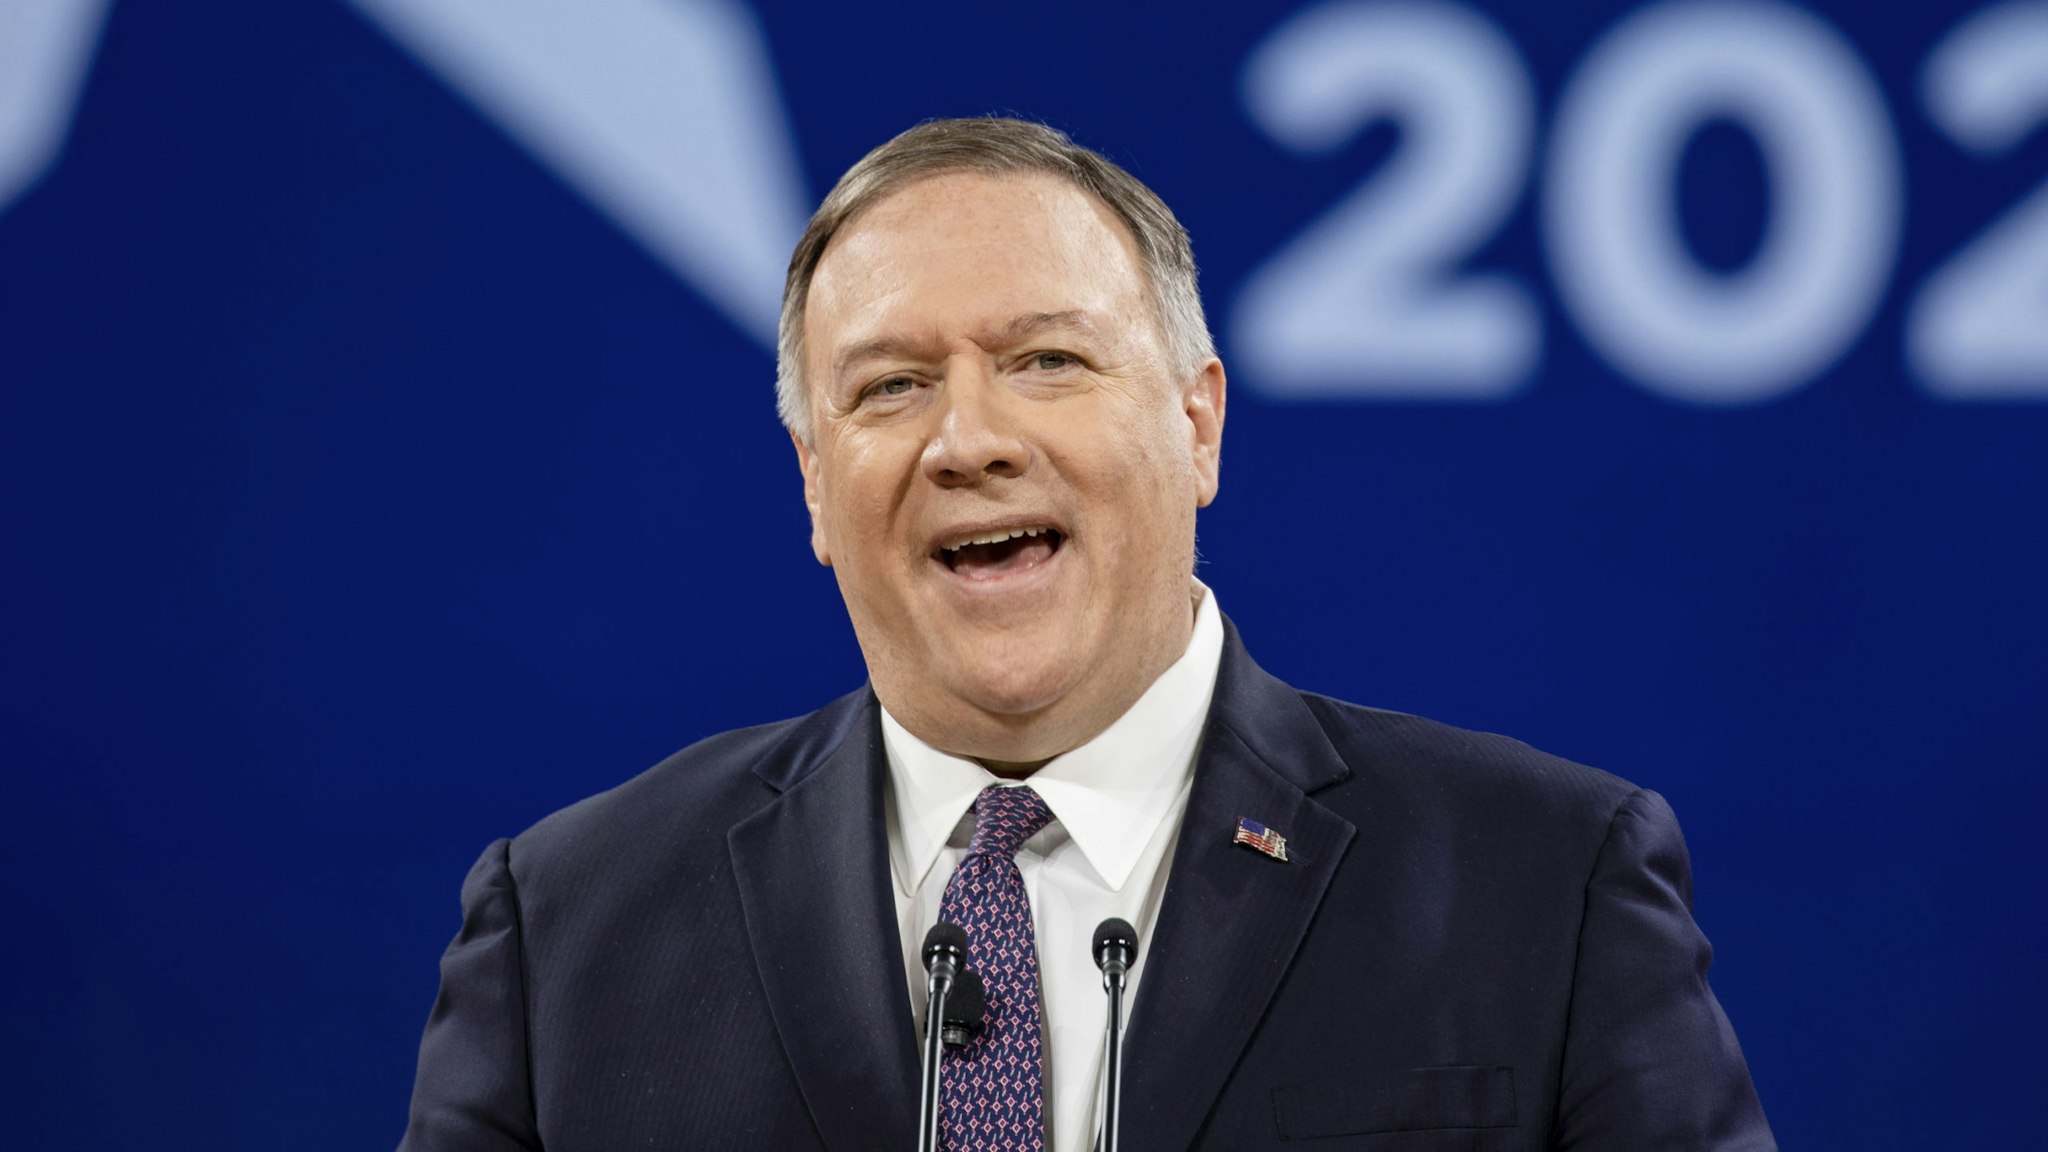 NATIONAL HARBOR, MD - FEBRUARY 28: Secretary of State Mike Pompeo speaks at the Conservative Political Action Conference 2020 (CPAC) hosted by the American Conservative Union on February 28, 2020 in National Harbor, MD.